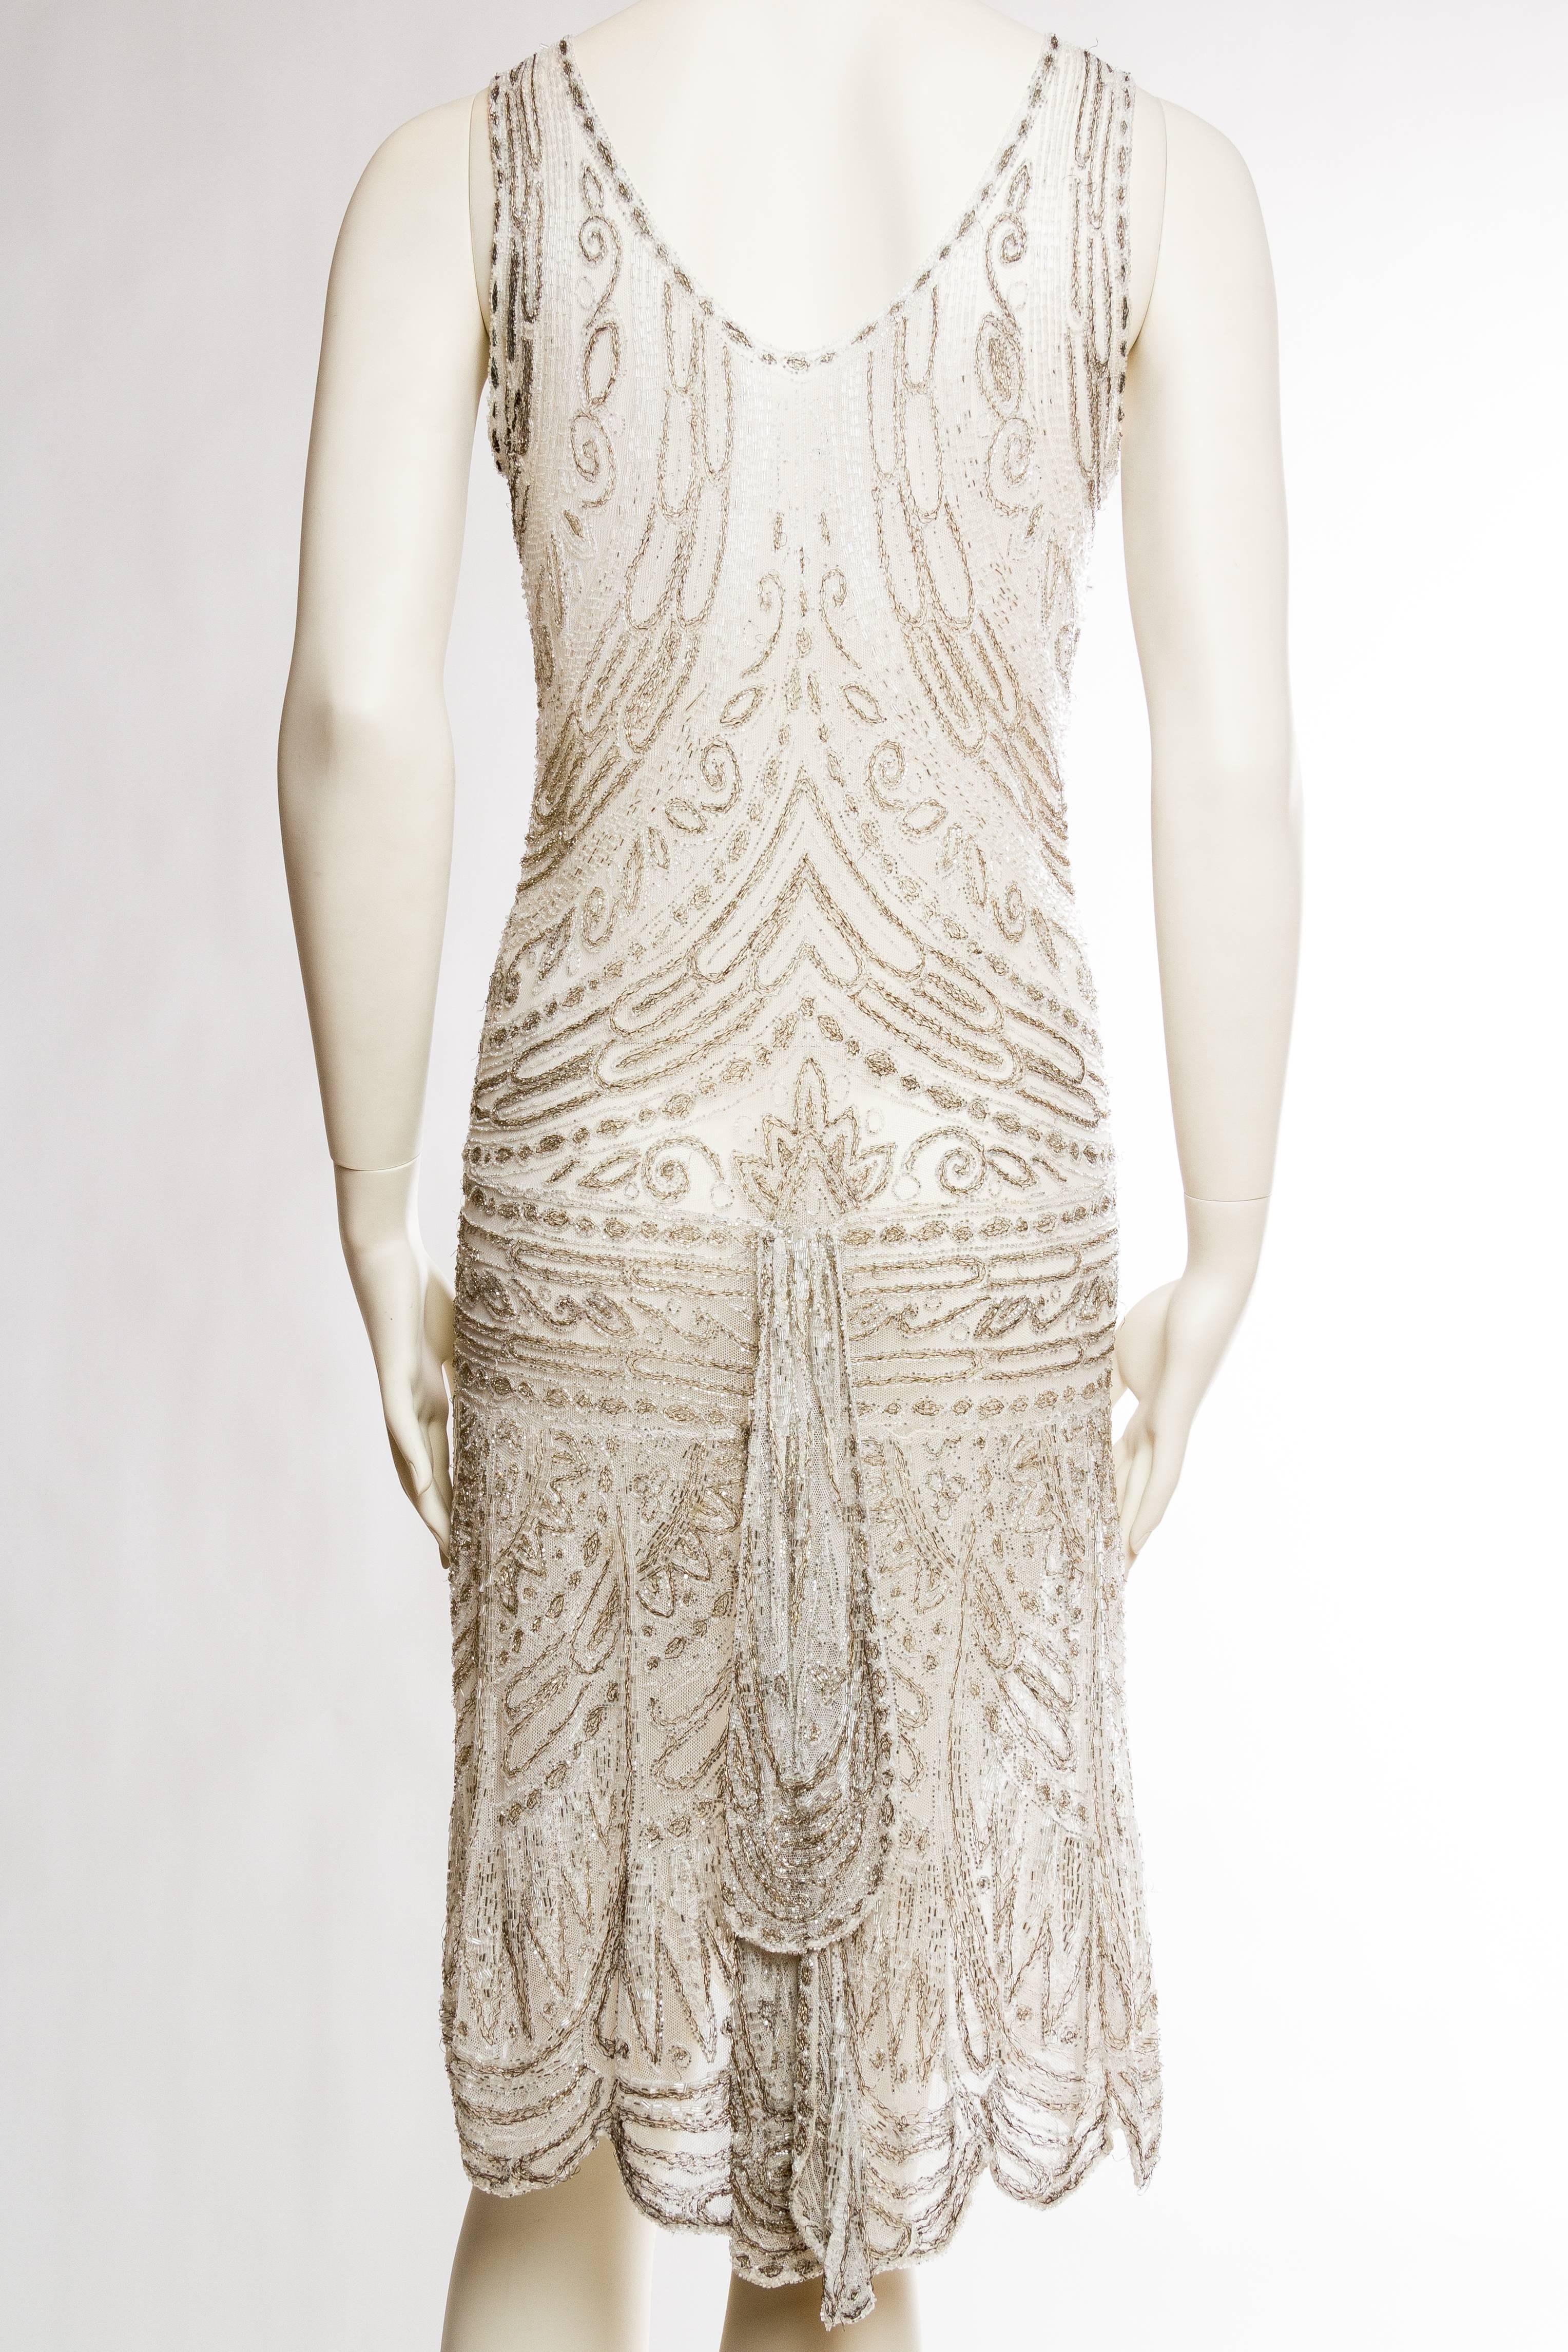 1920s Beaded Net Dress Embroidered with Silver Threads 1